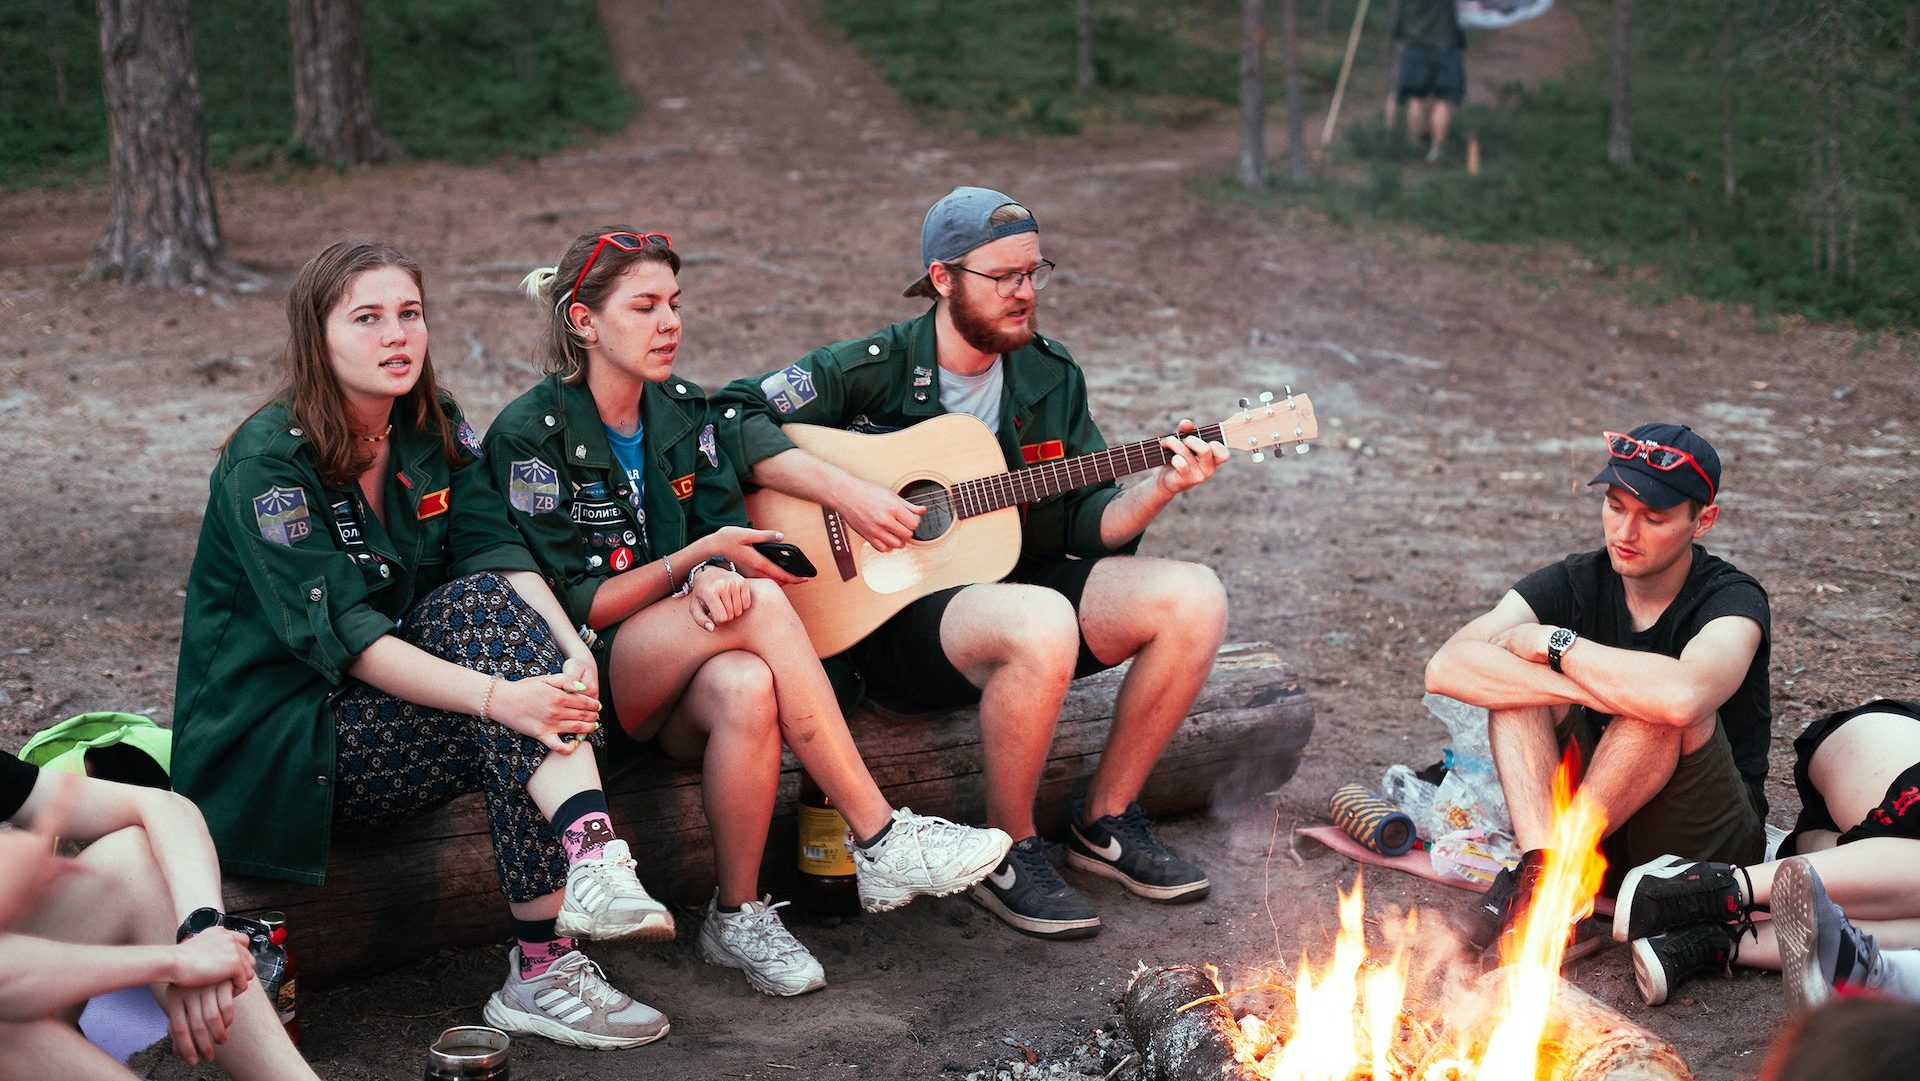 Campfire Songs for Kids